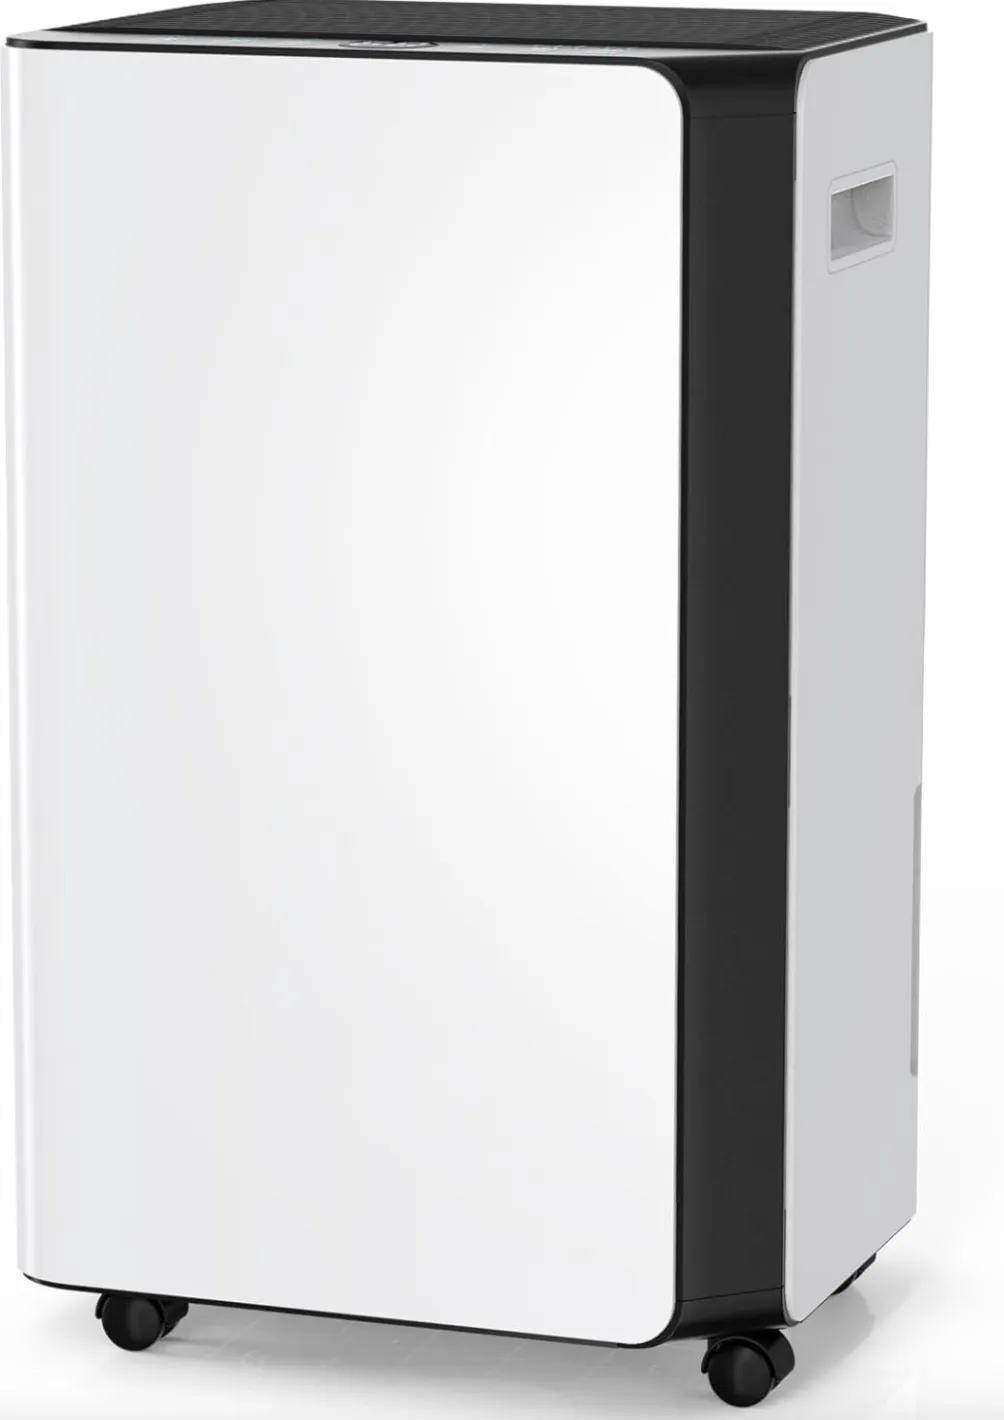 AirOrig Dehumidifiers 20L - was £209.99 now £146.99 (save 30%)